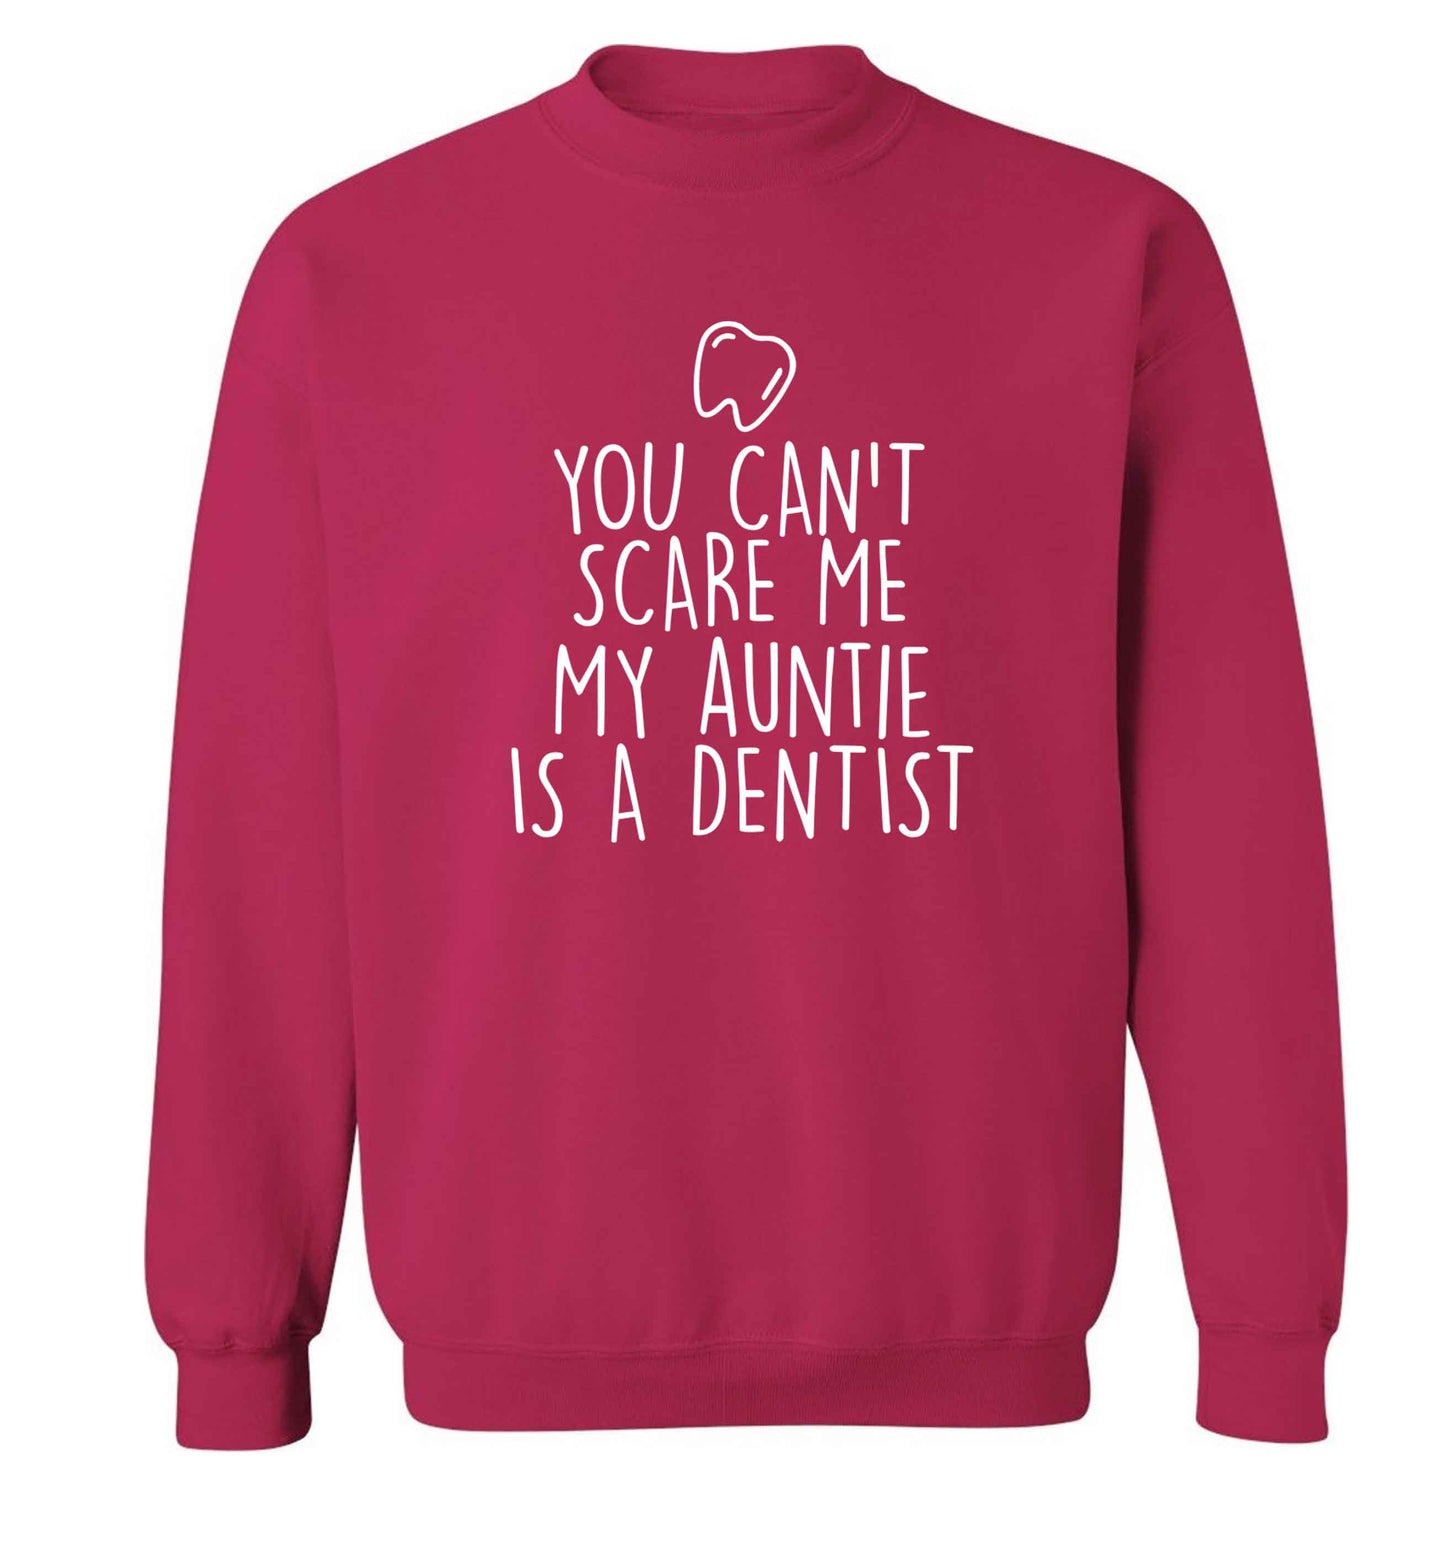 You can't scare me my auntie is a dentist adult's unisex pink sweater 2XL